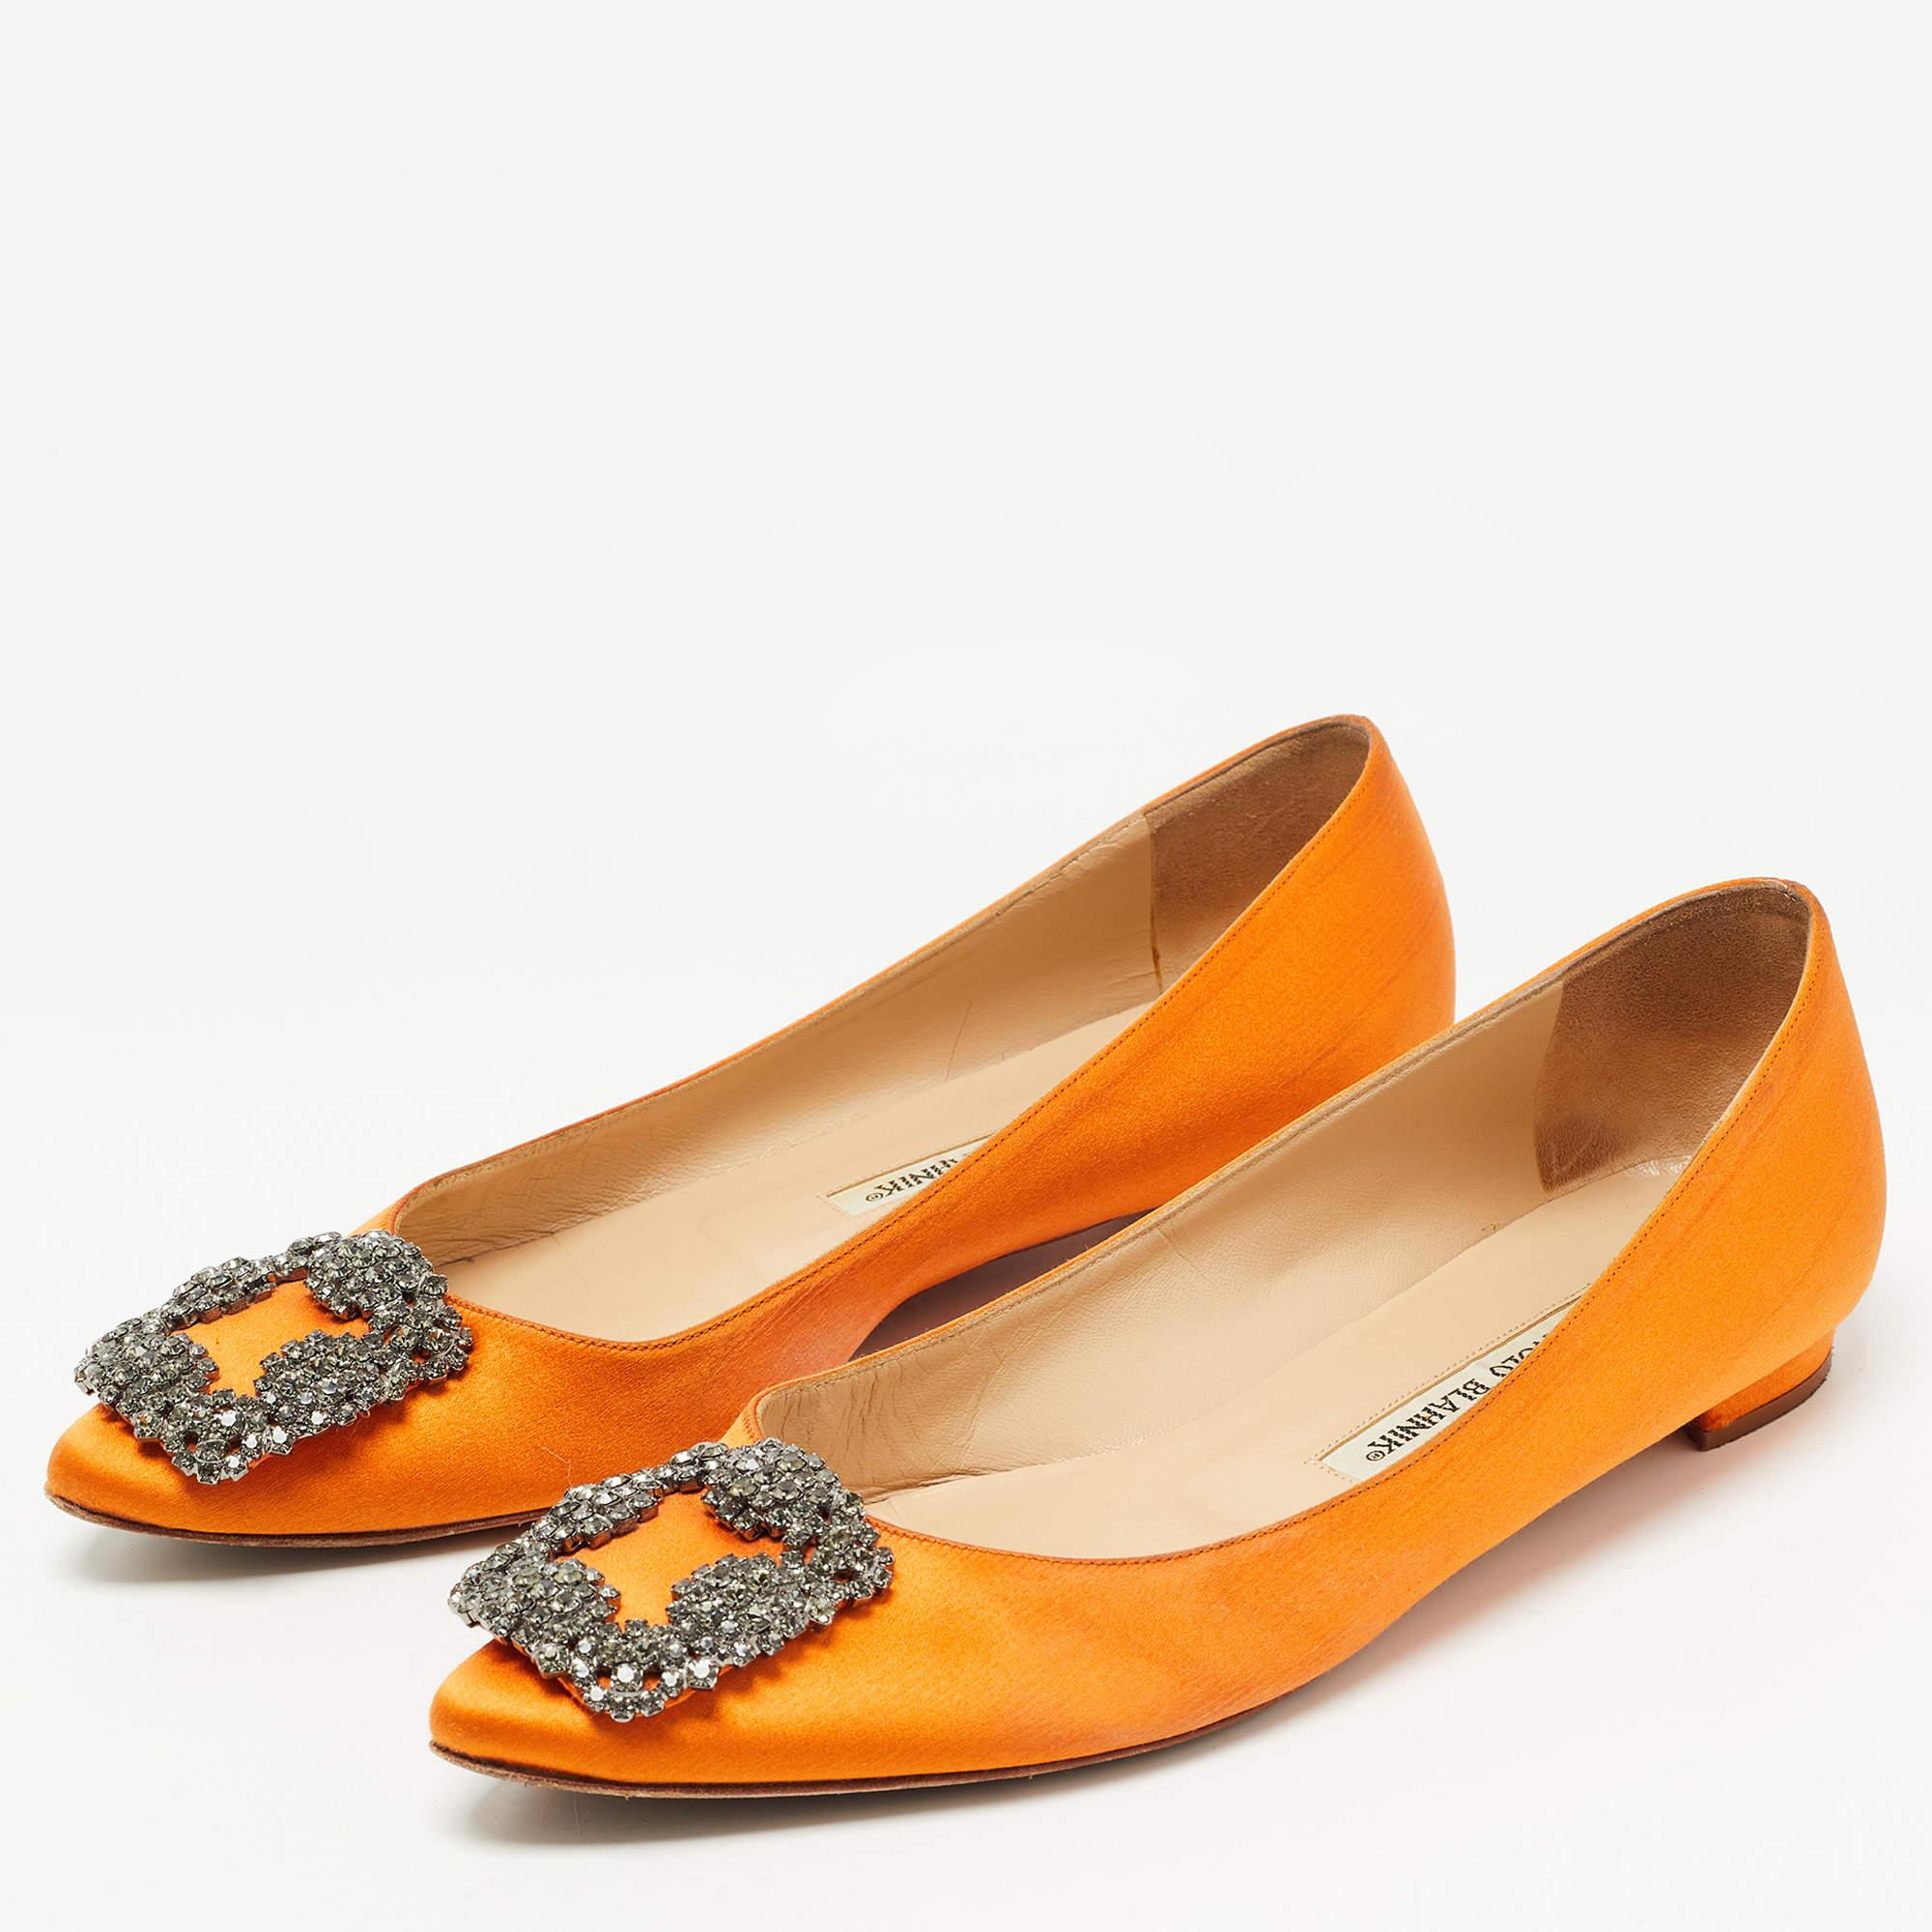 Complete your look by adding these designer ballet flats to your collection of everyday footwear. They are crafted skilfully to grant the perfect fit and style.

Includes: Original Dustbag